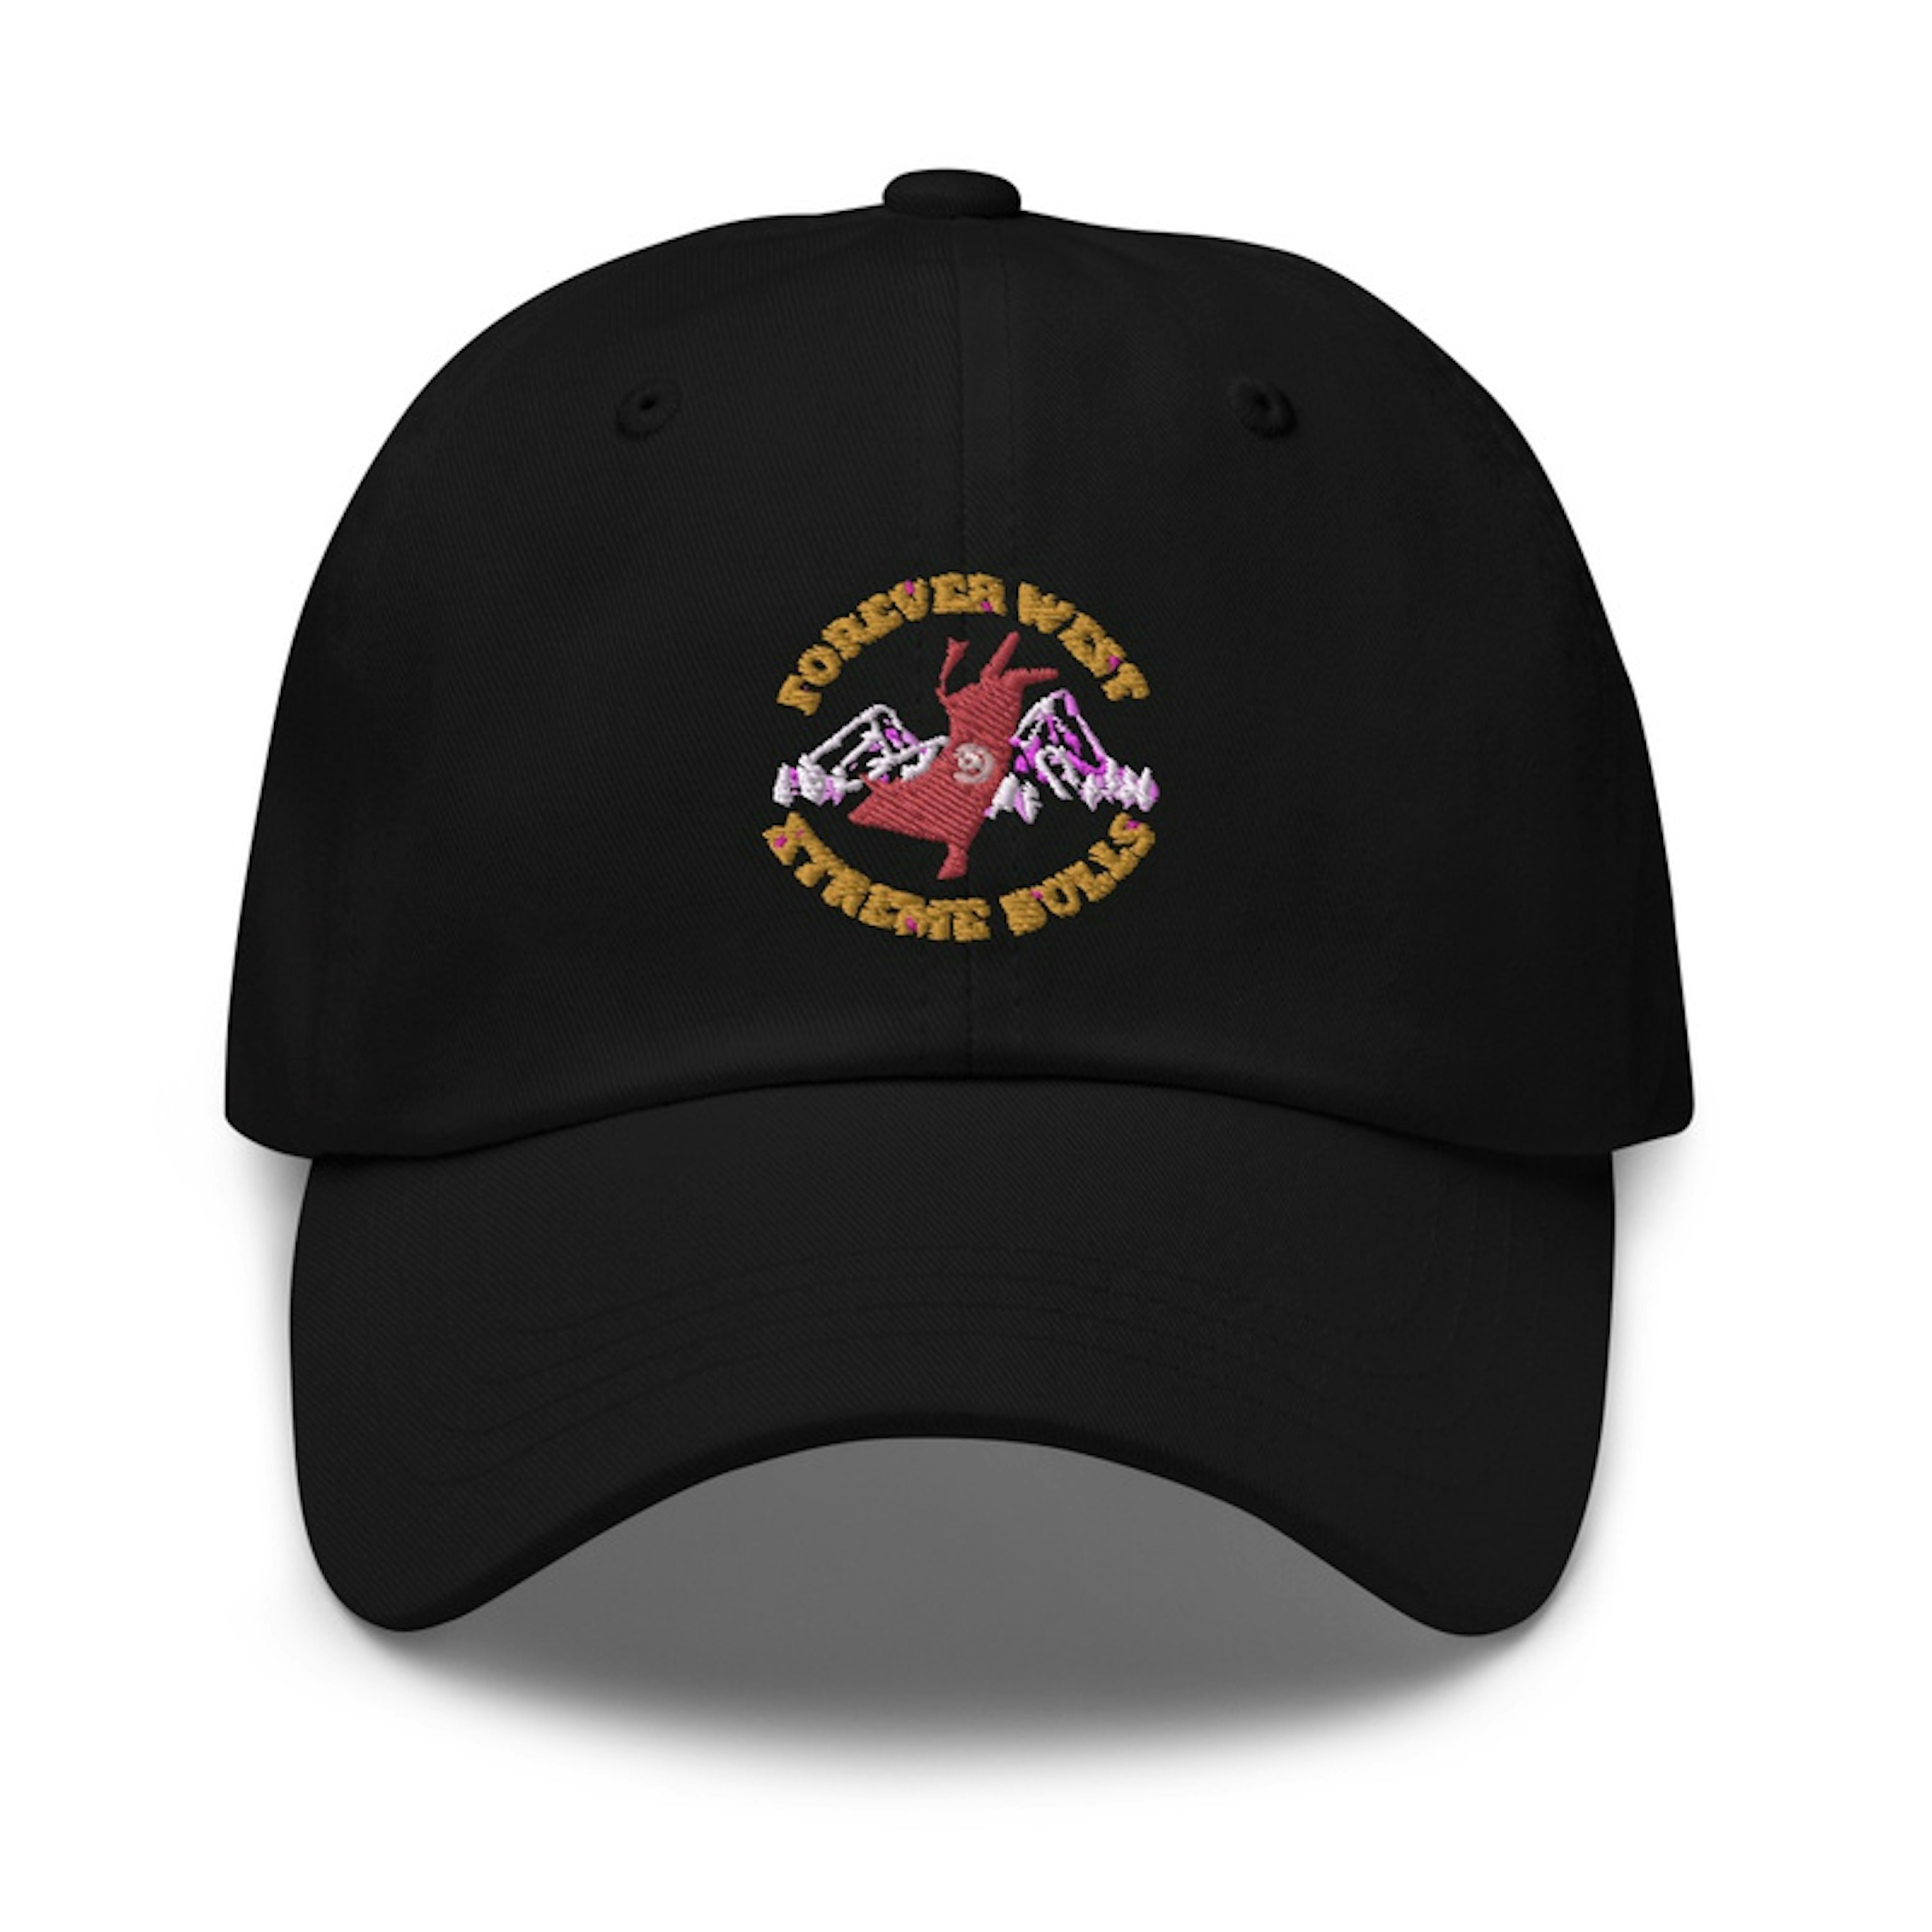 Dad Hats - Forever West Xtreme Bulls